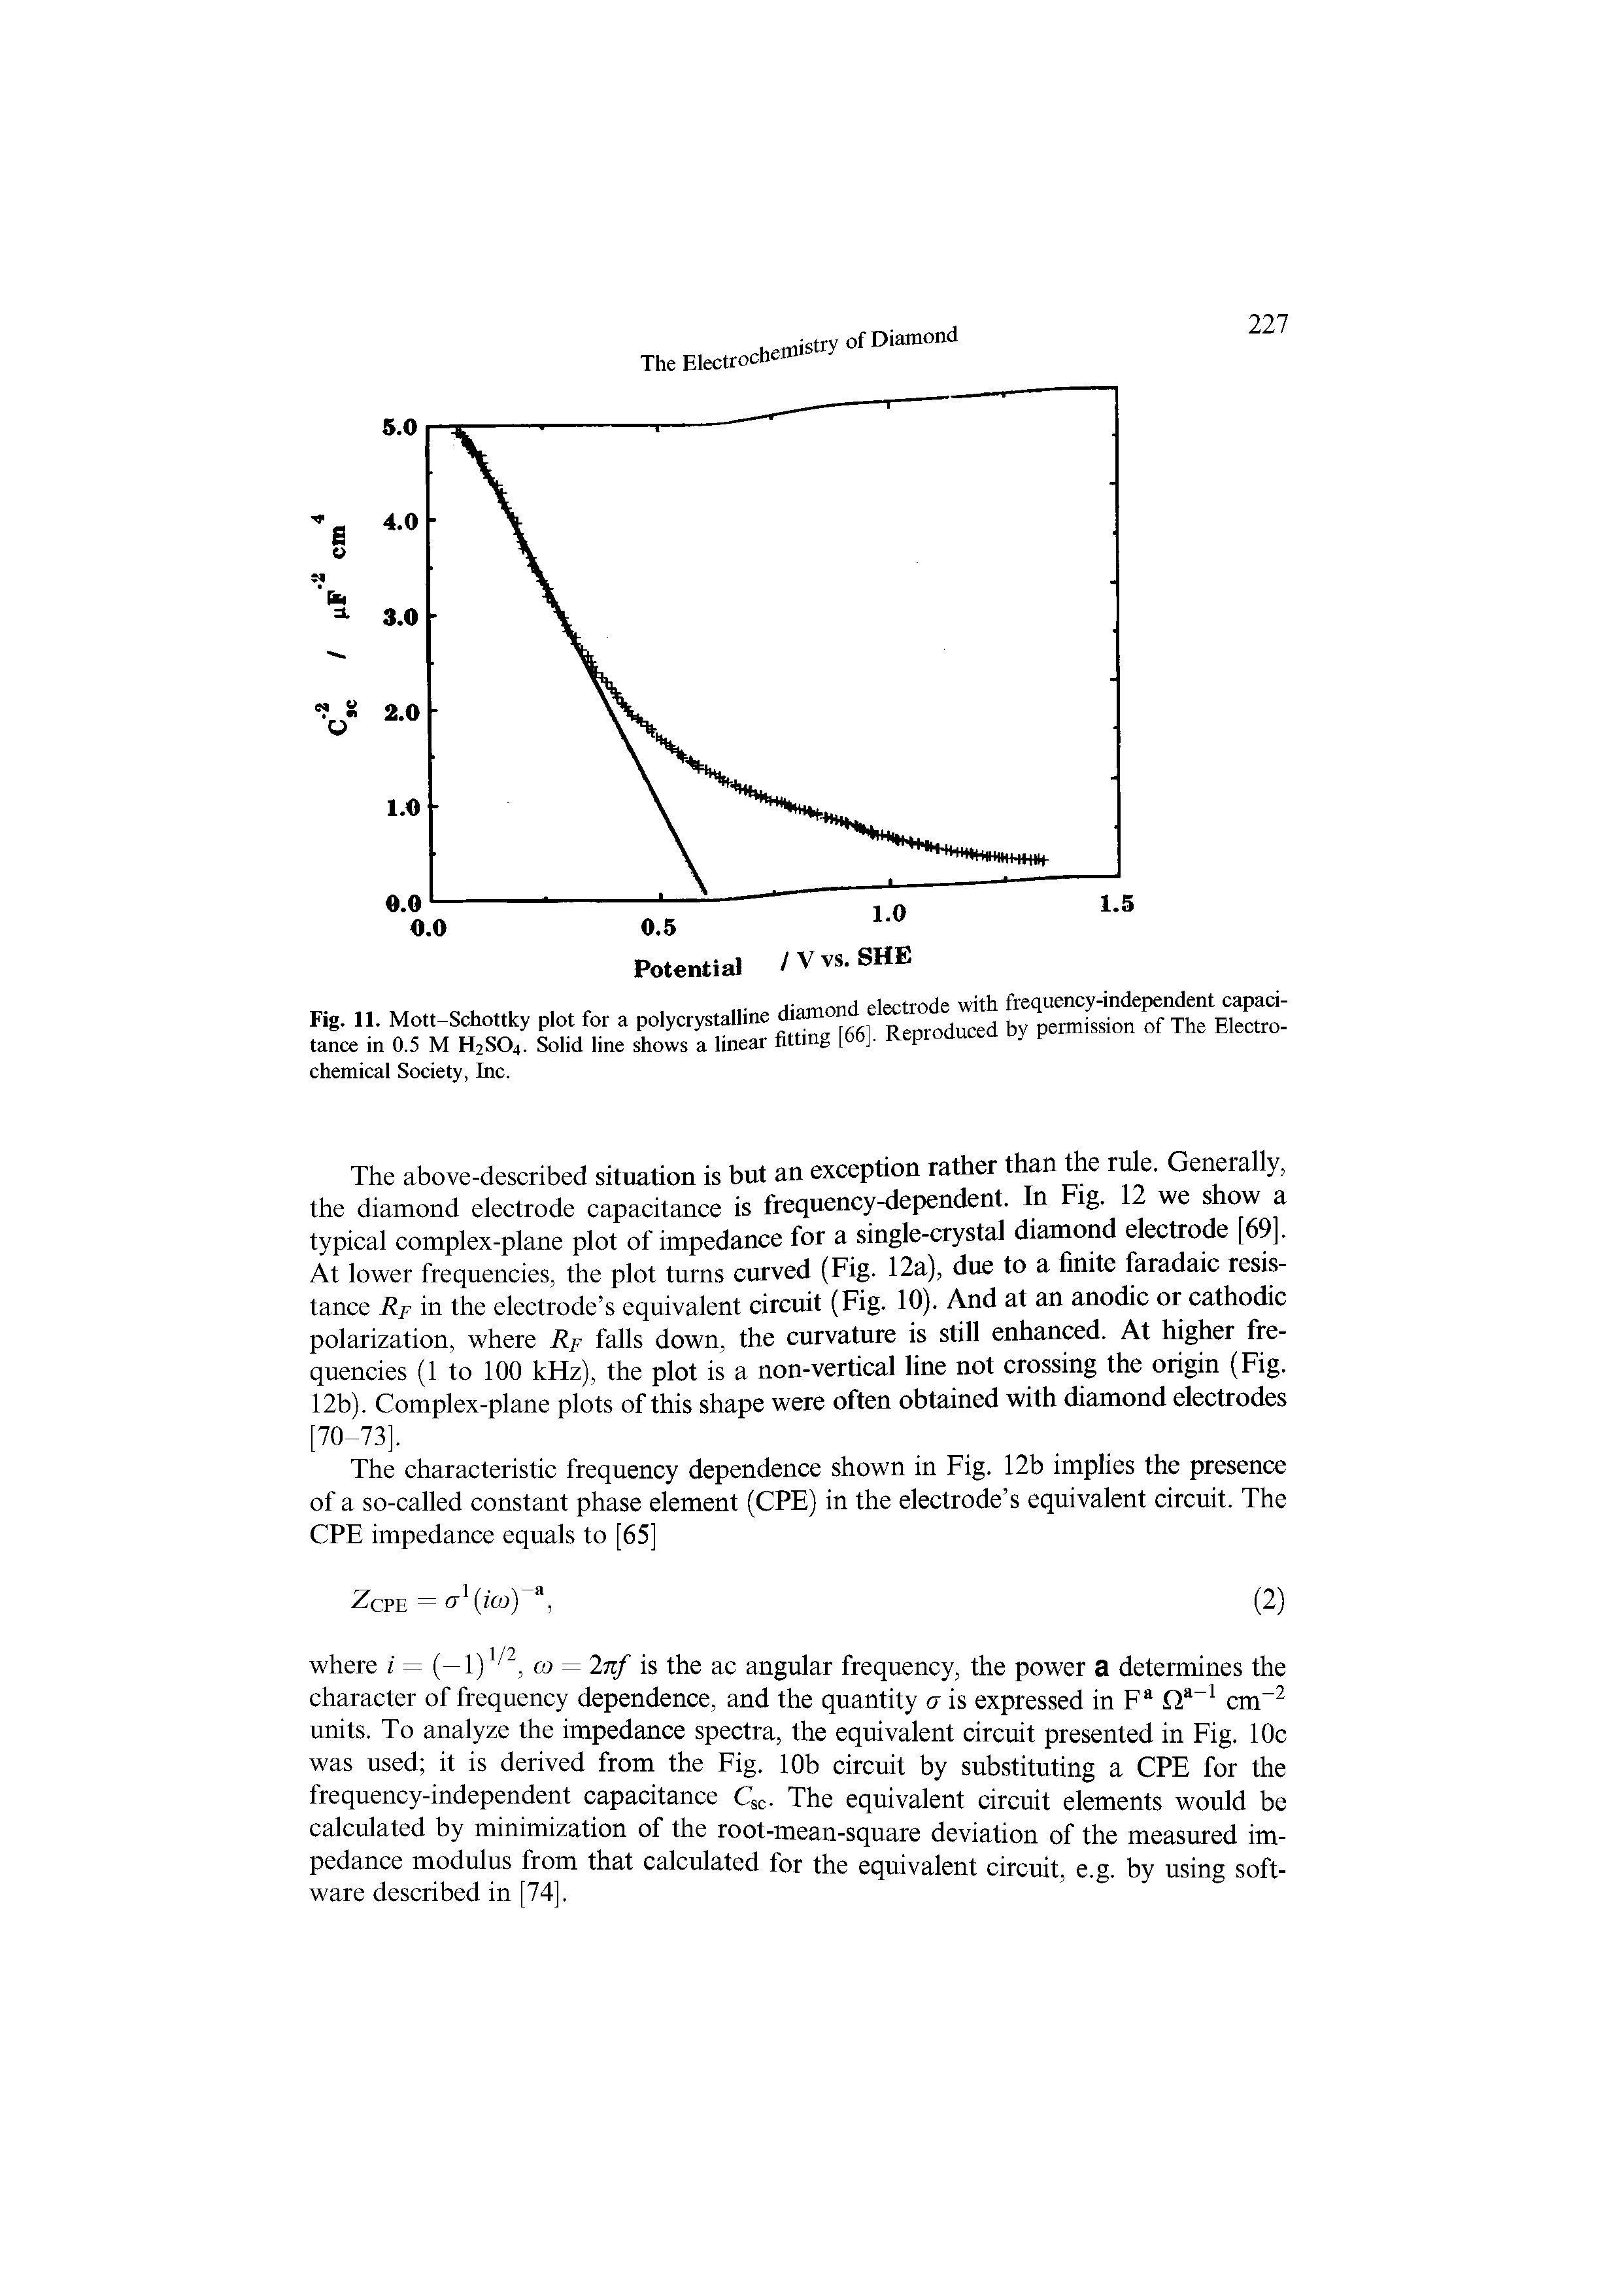 Fig. 11. Mott-Schottky plot for a polycrystalline diamond electrode with tance in 0.5 M H2S04. Solid line shows a linear fitting [66], Reproduced chemical Society, Inc.